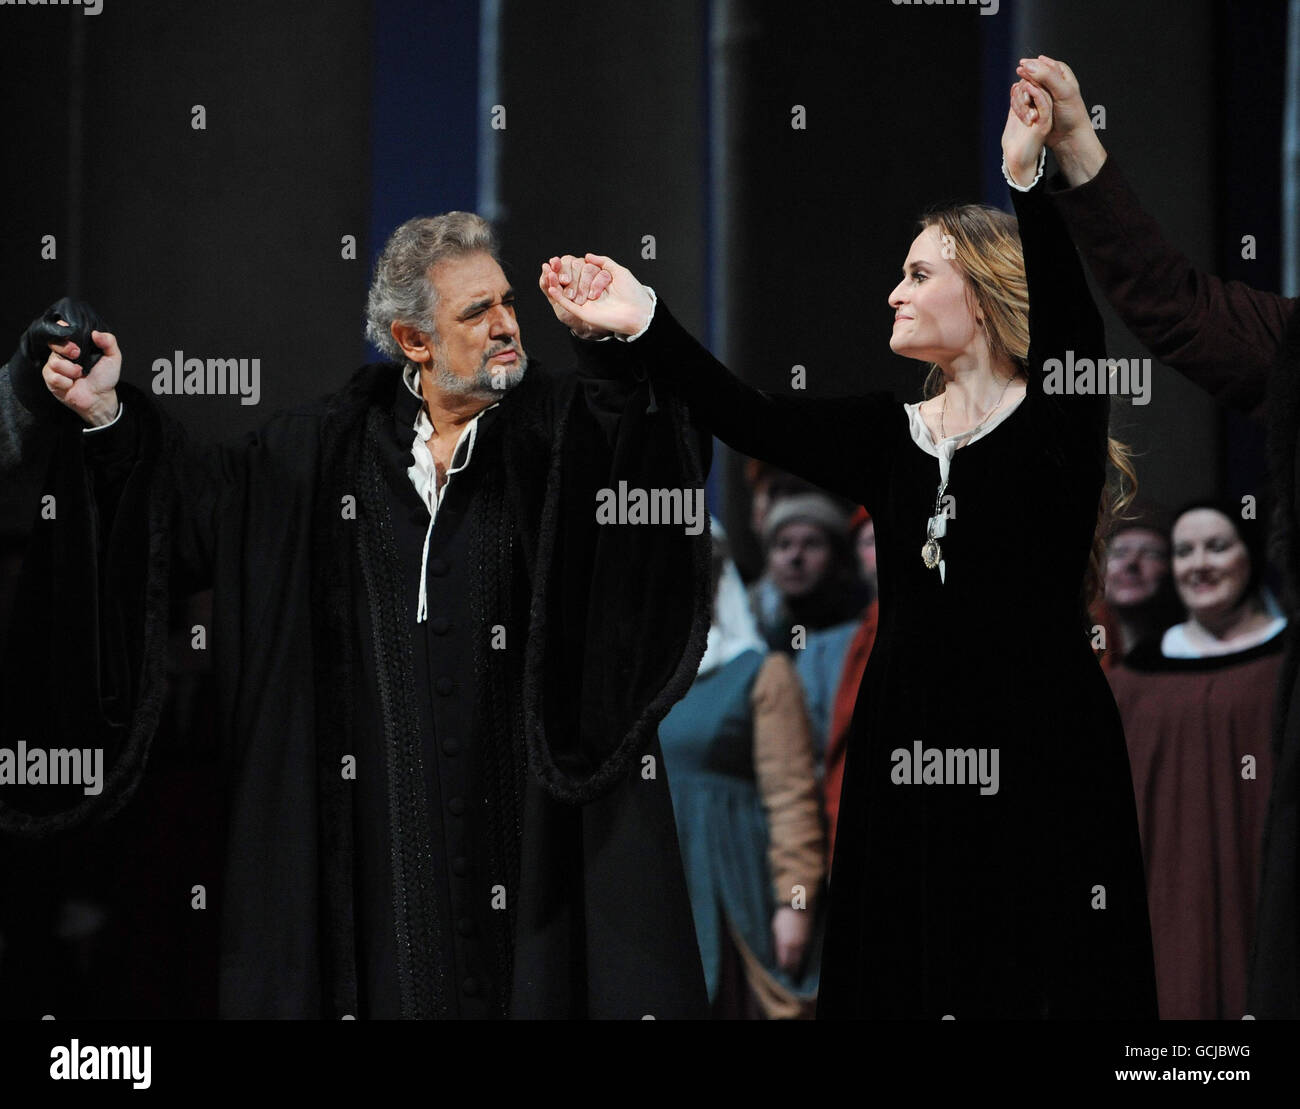 Placido Domingo takes a curtain call with Russian soprano Marina Poplavskaya, after performing in Verdi's Simon Boccanegra at the Royal Opera House in London - his 225th performance at the famous venue. The Spanish tenor sung in barritone, as demanded by the role. Stock Photo